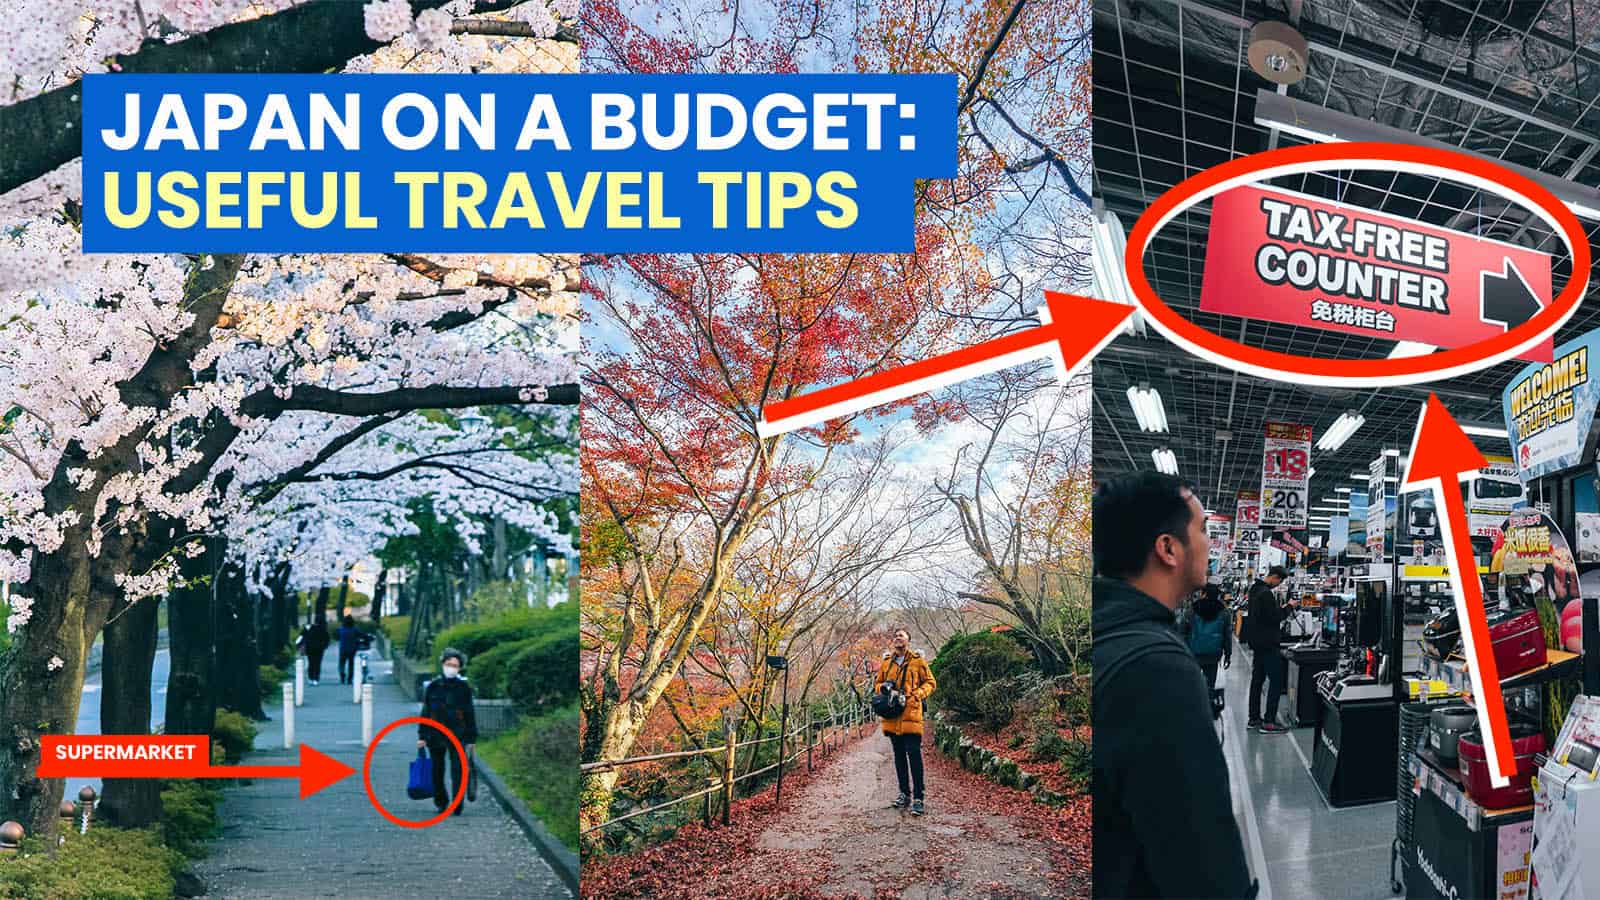 JAPAN ON A BUDGET: 20 Practical Tips for Backpackers